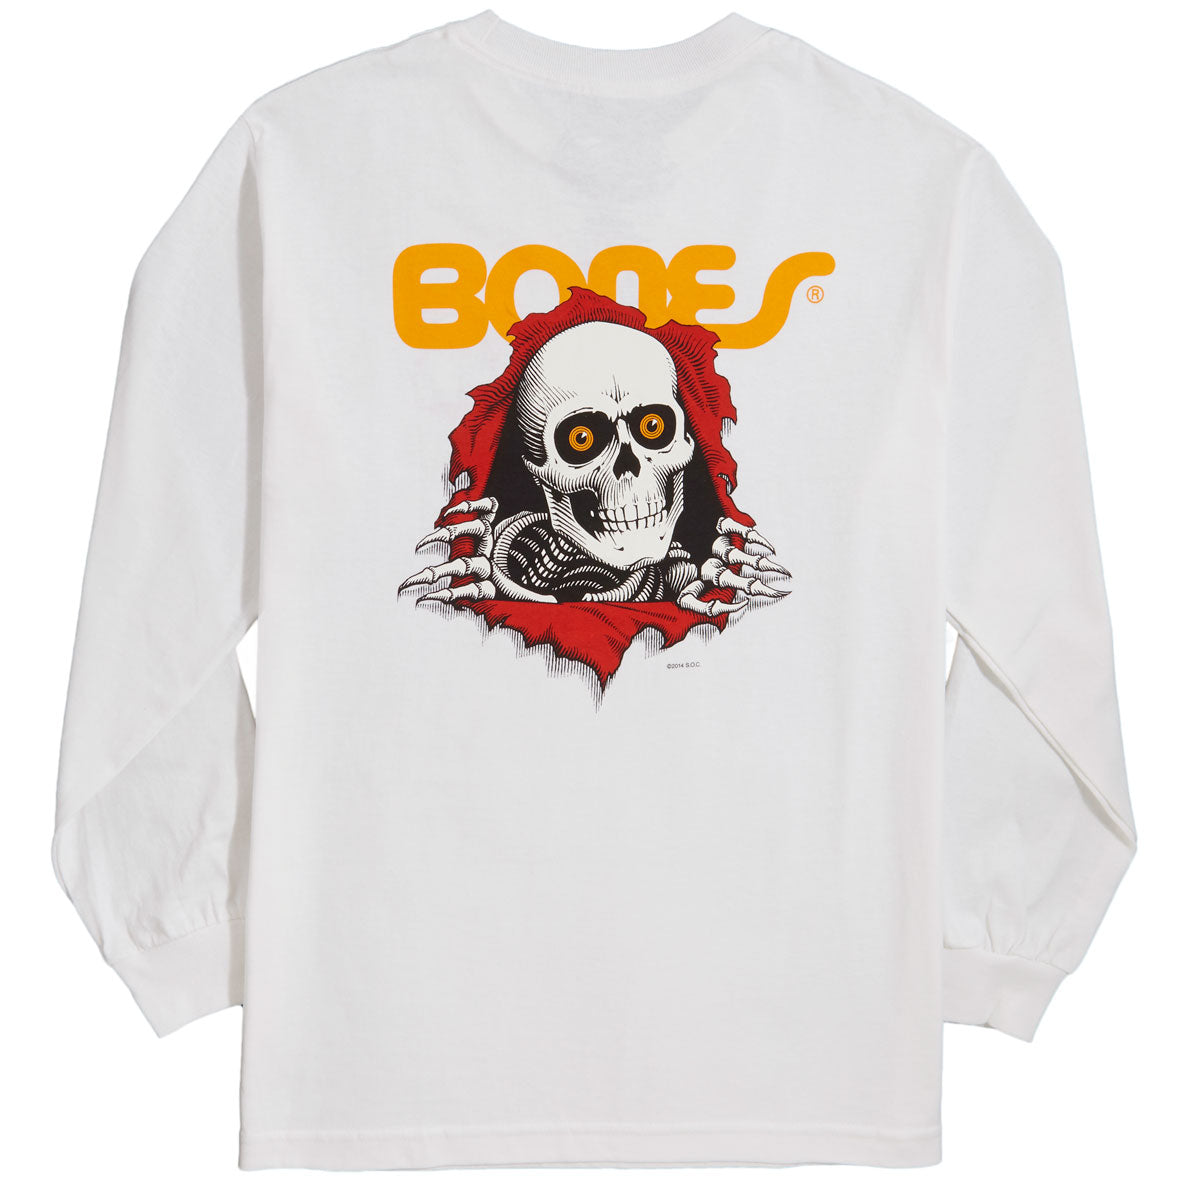 Powell-Peralta Ripper Long Sleeve T-Shirt - White image 1